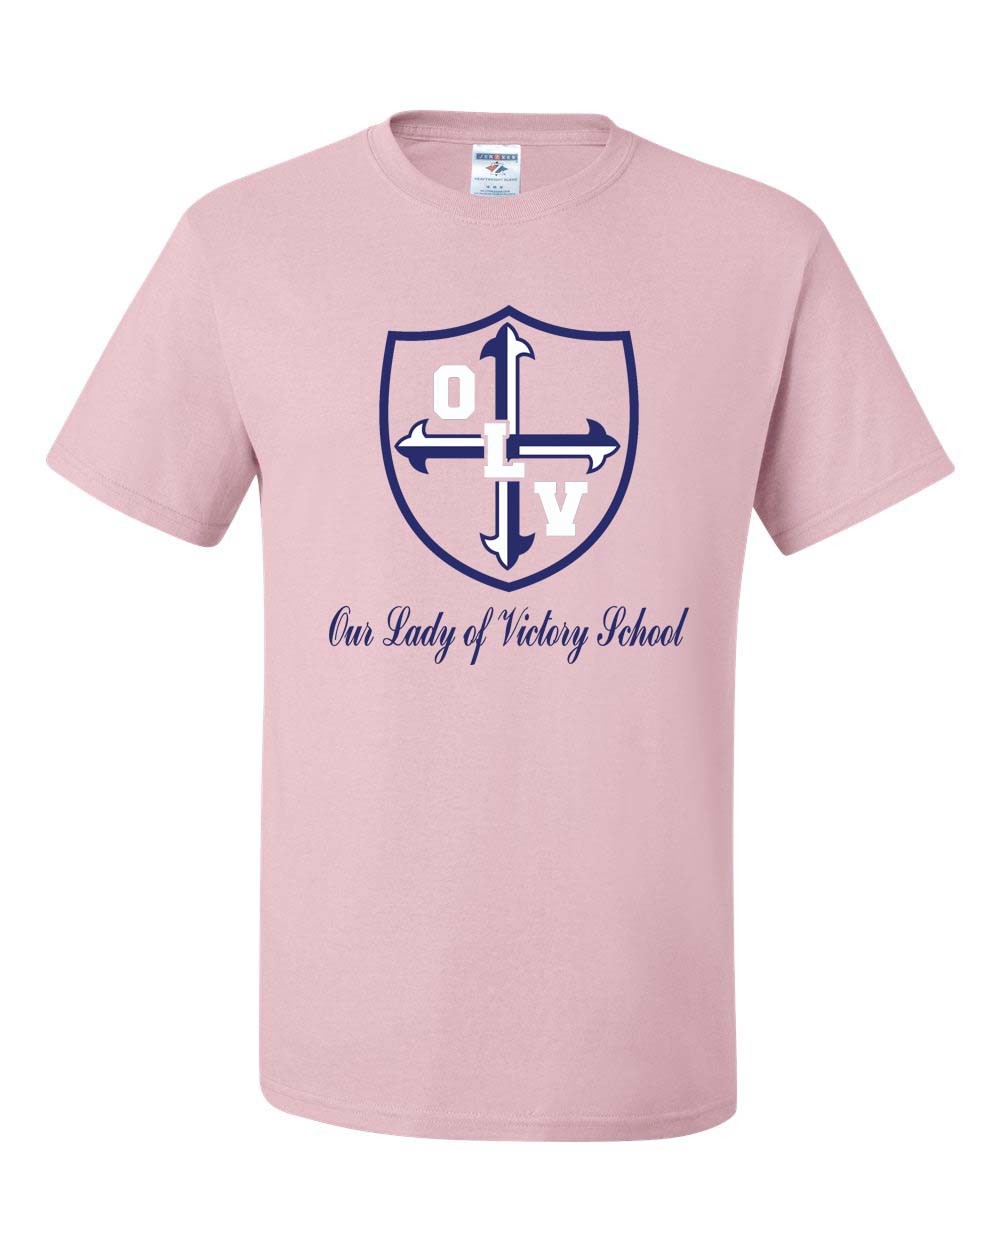 OLV  S/S Spirit T-Shirt w/ Navy Logo - Please Allow 2-3 Weeks for Delivery